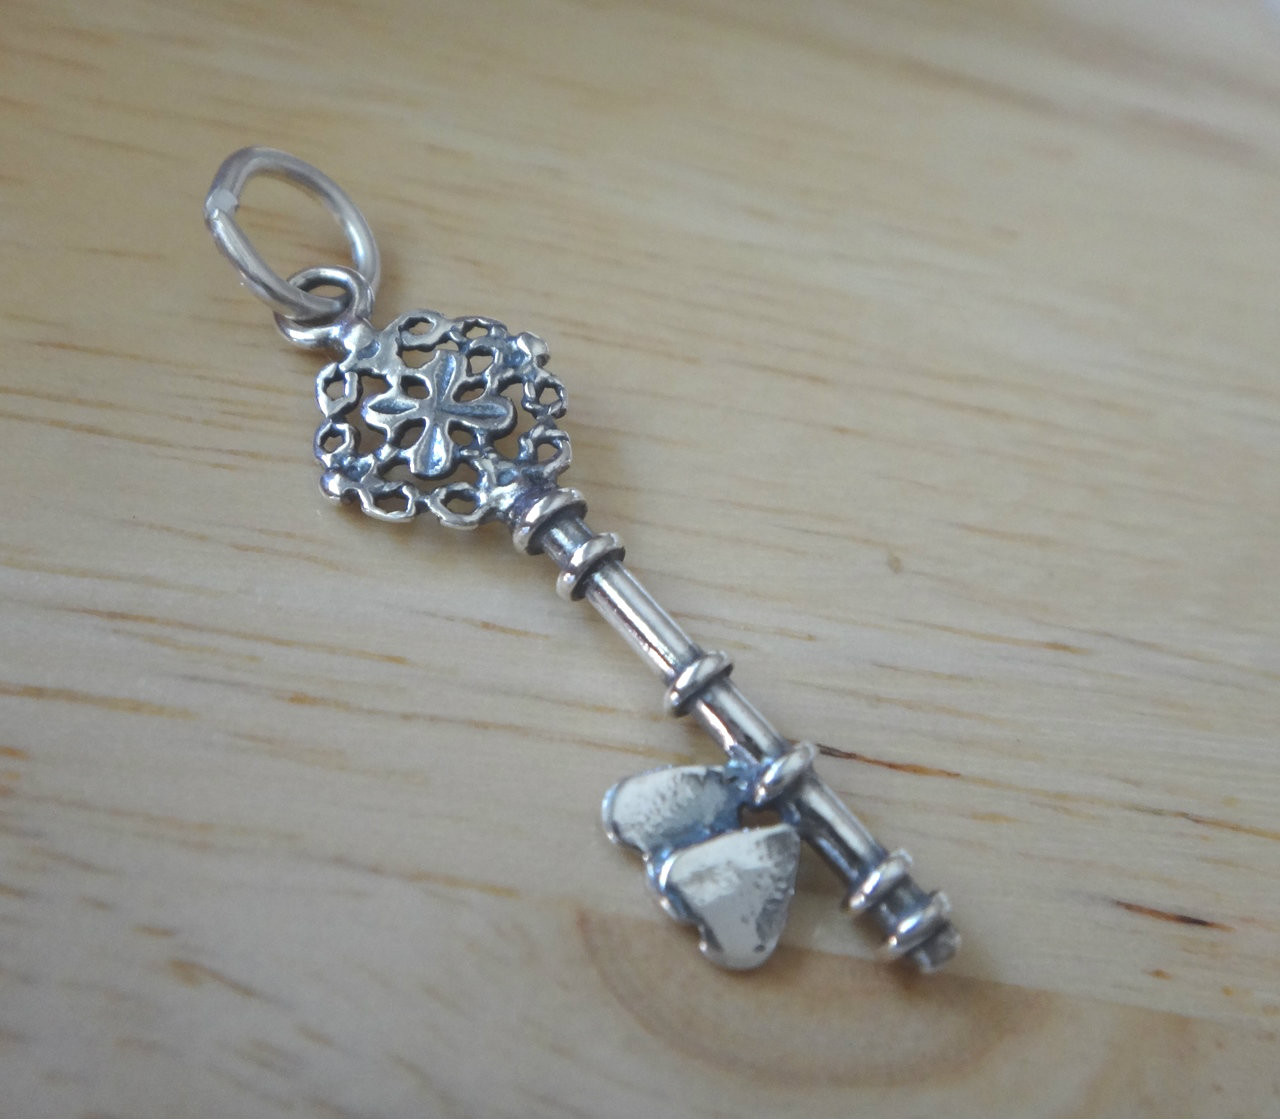 STERLING SILVER MARTIAL ARTS INSTRUCTOR CHARM WITH ONE SPLIT RING